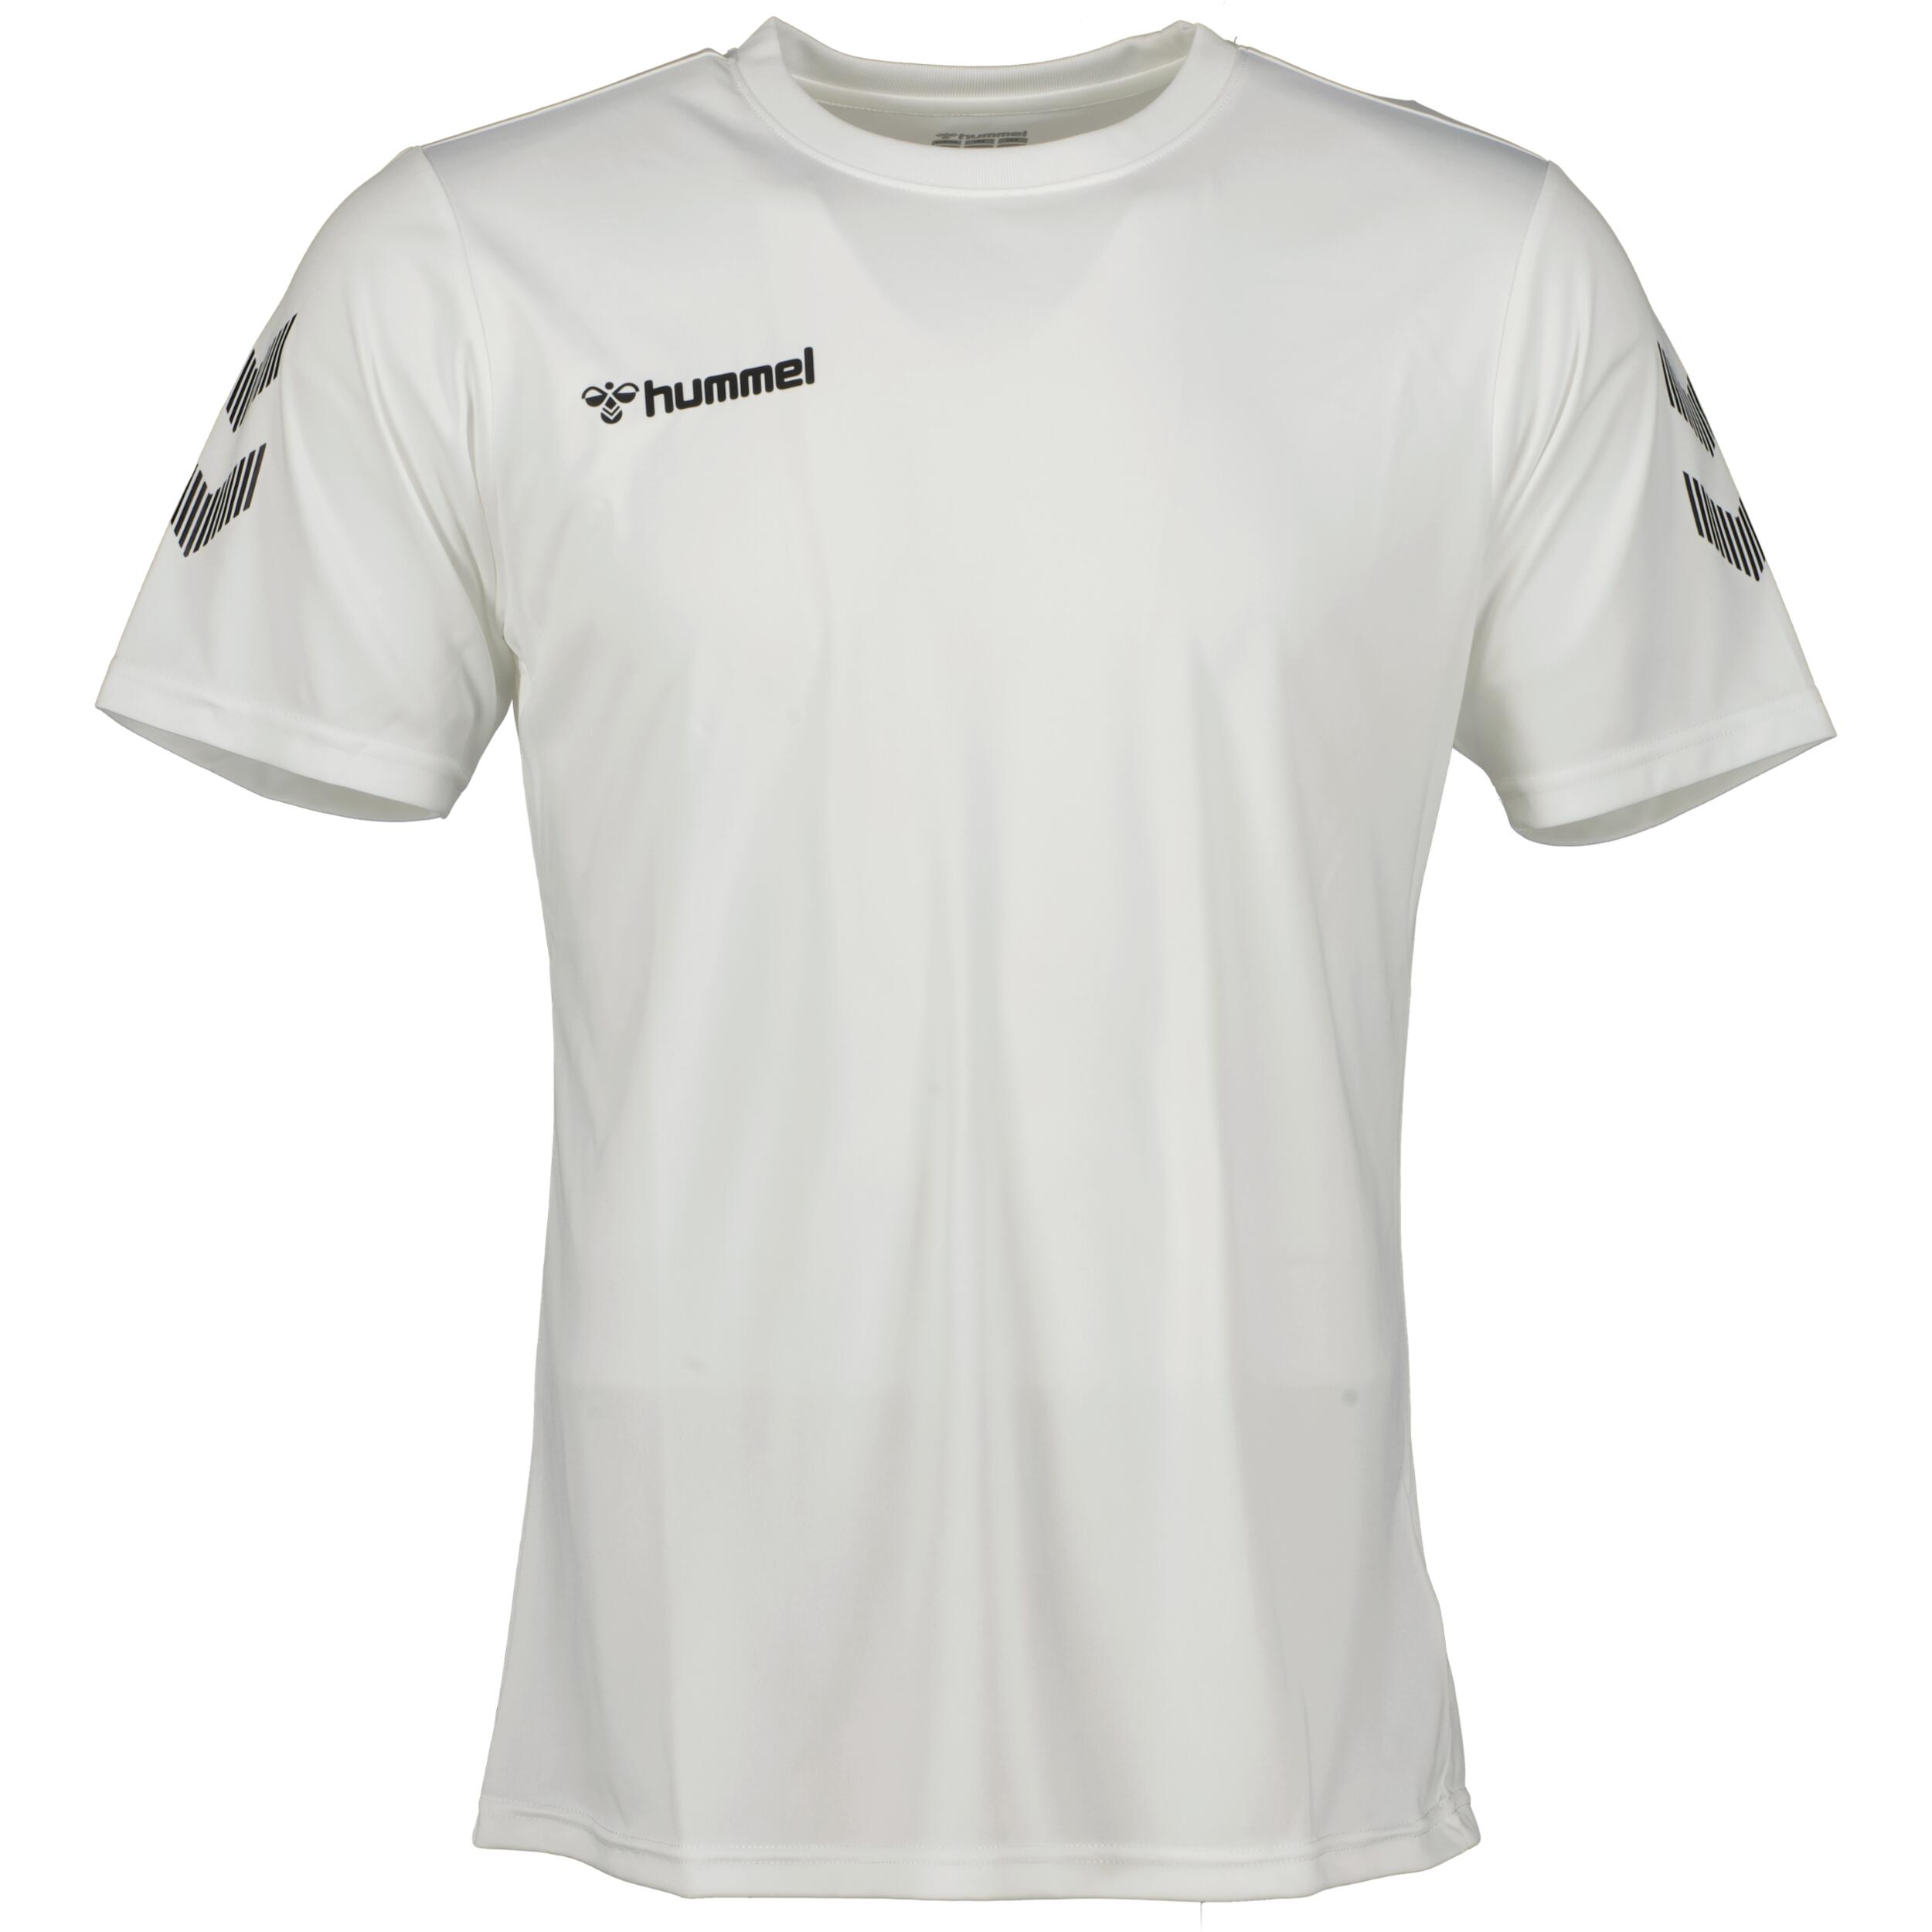 Solo jersey for men, great for football, in white 1/3